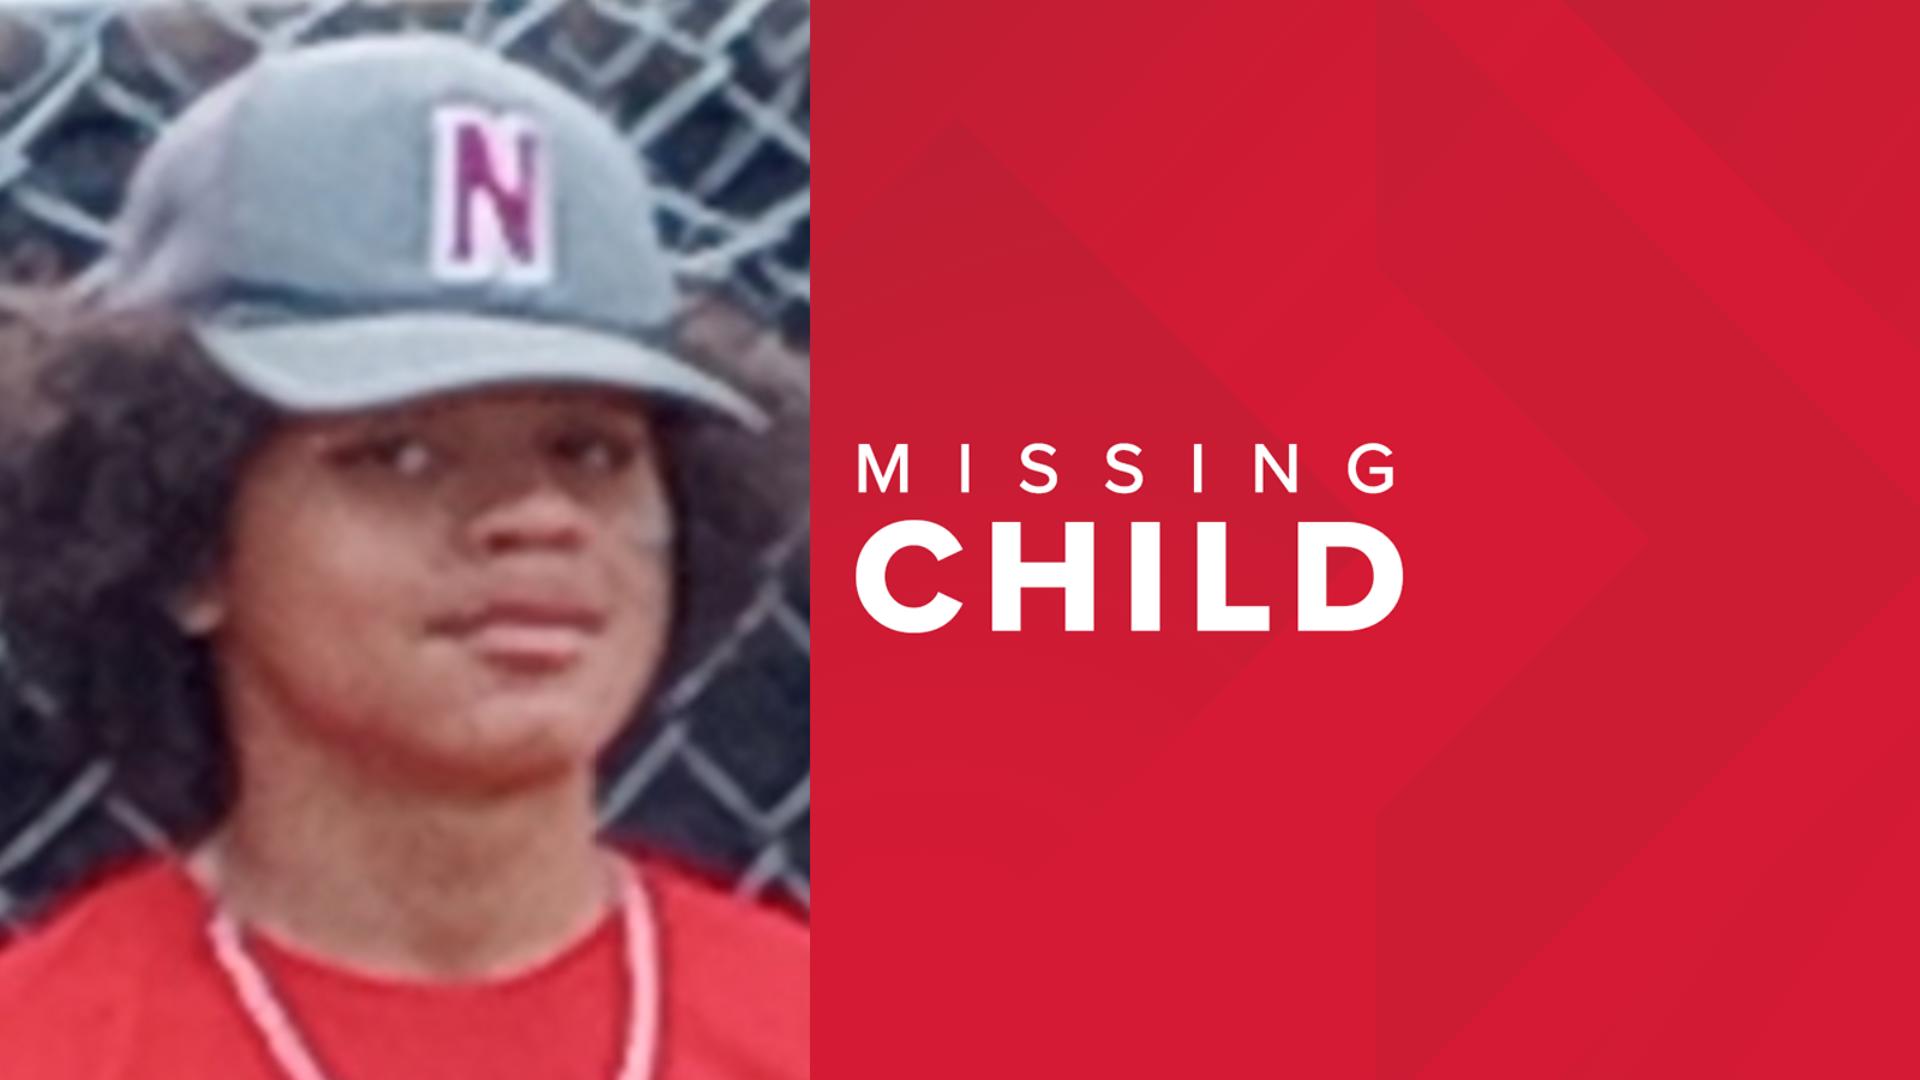 The National Center for Missing & Exploited Children is asking the public for help in finding 12-year-old Chase Buckner who has been missing since June 10.